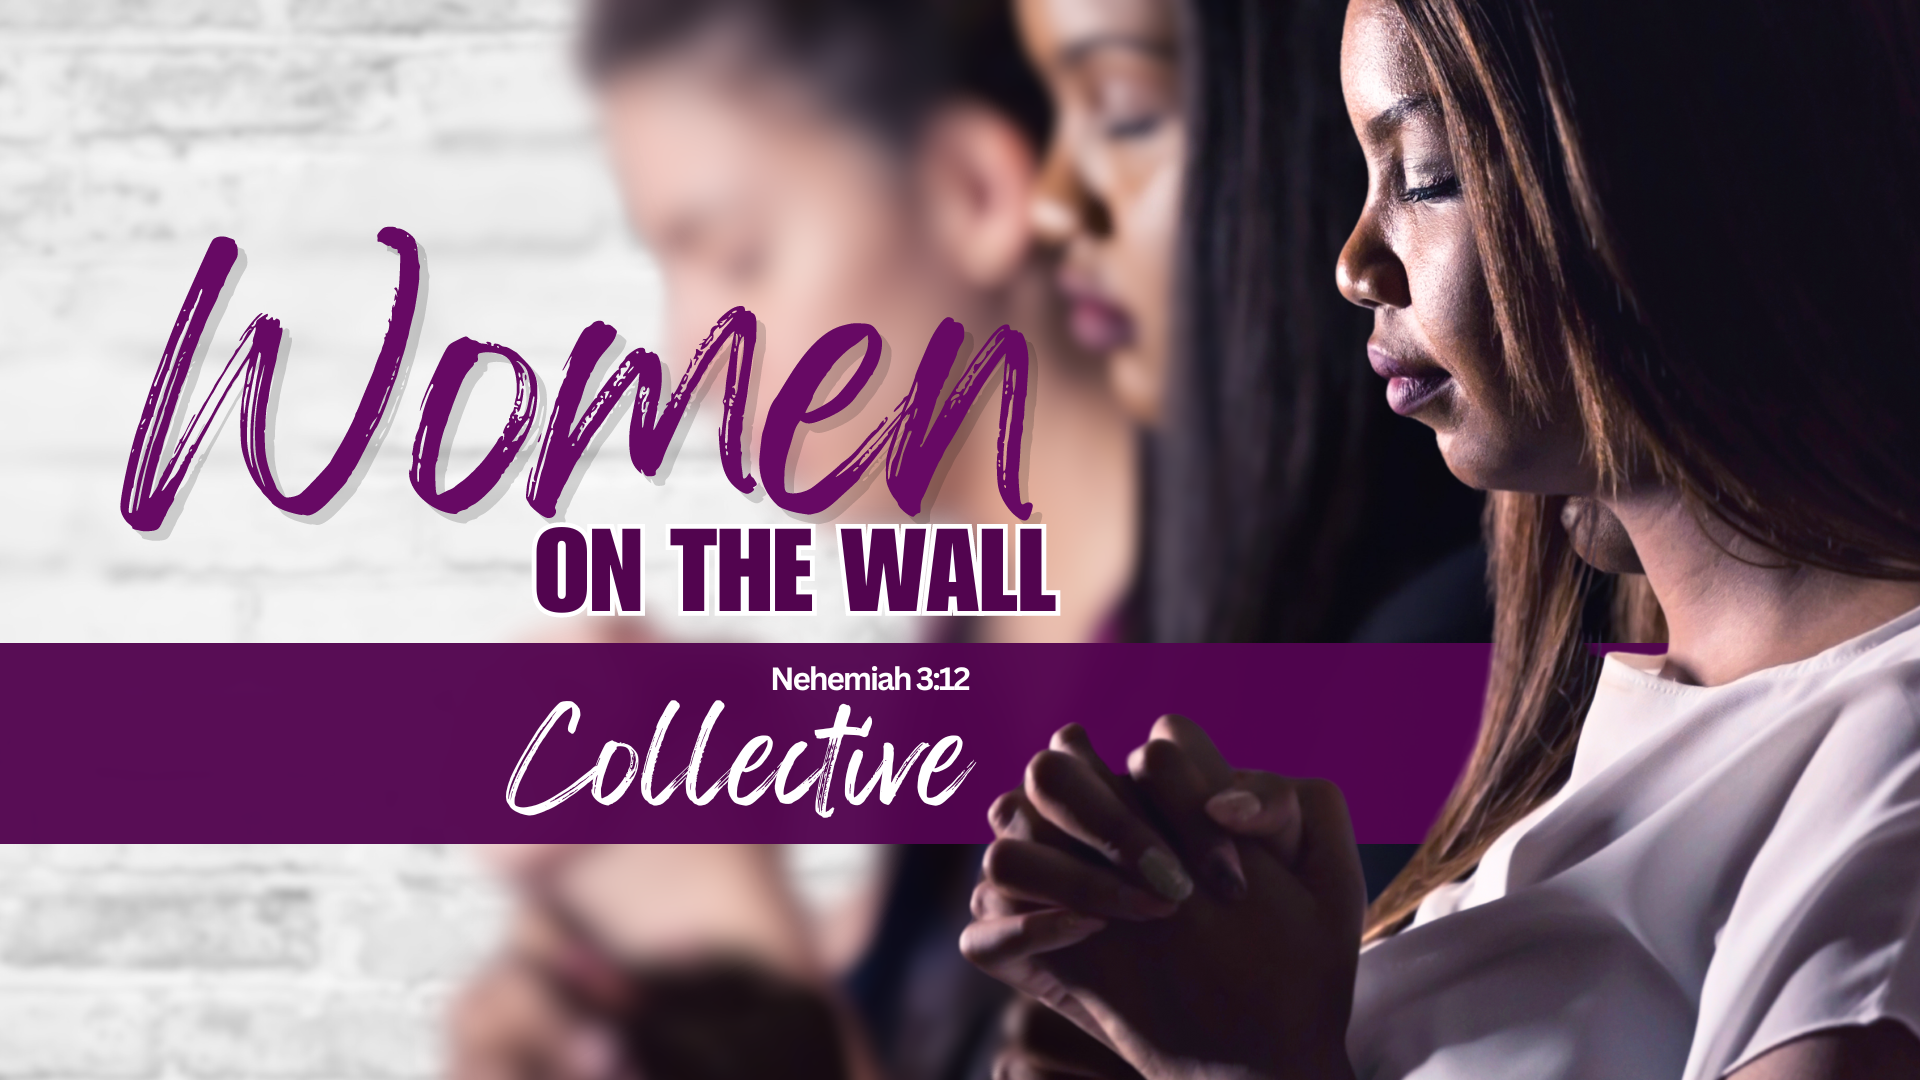 Women on the wall collective with praying women